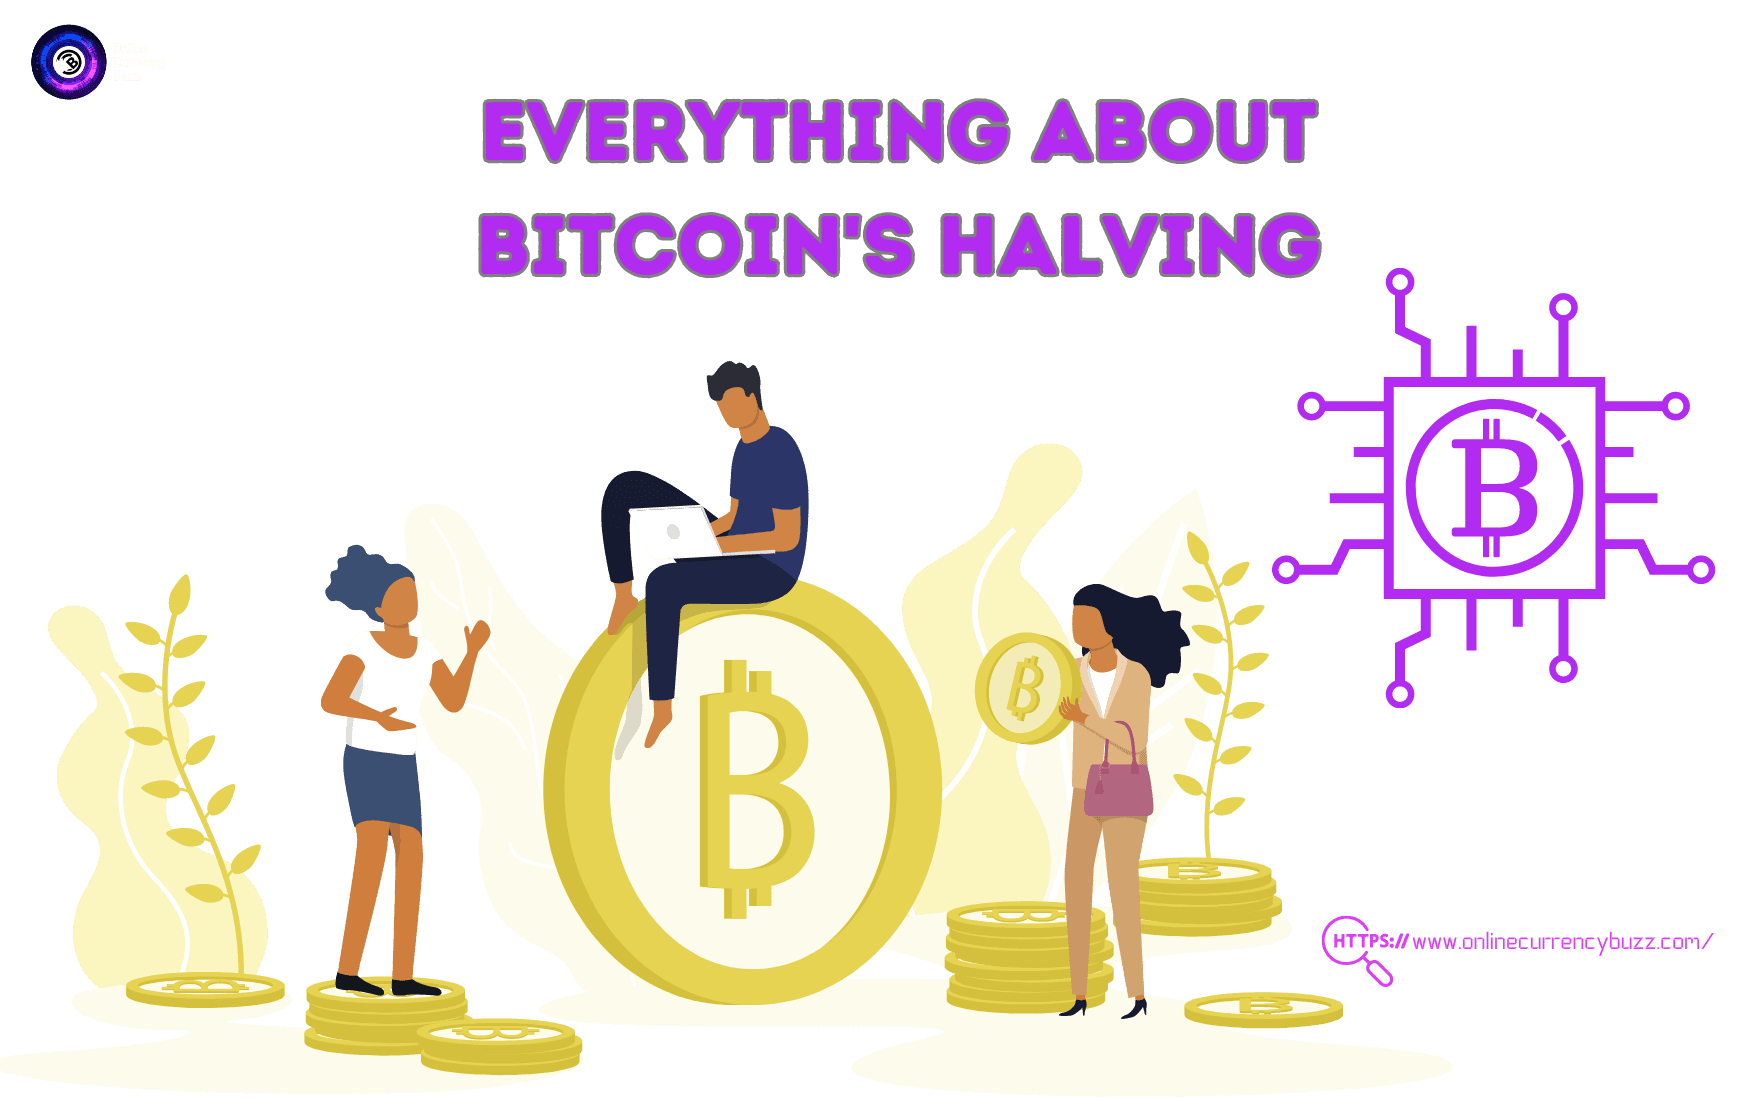 Bitcoin's Halving: What You Need To Know